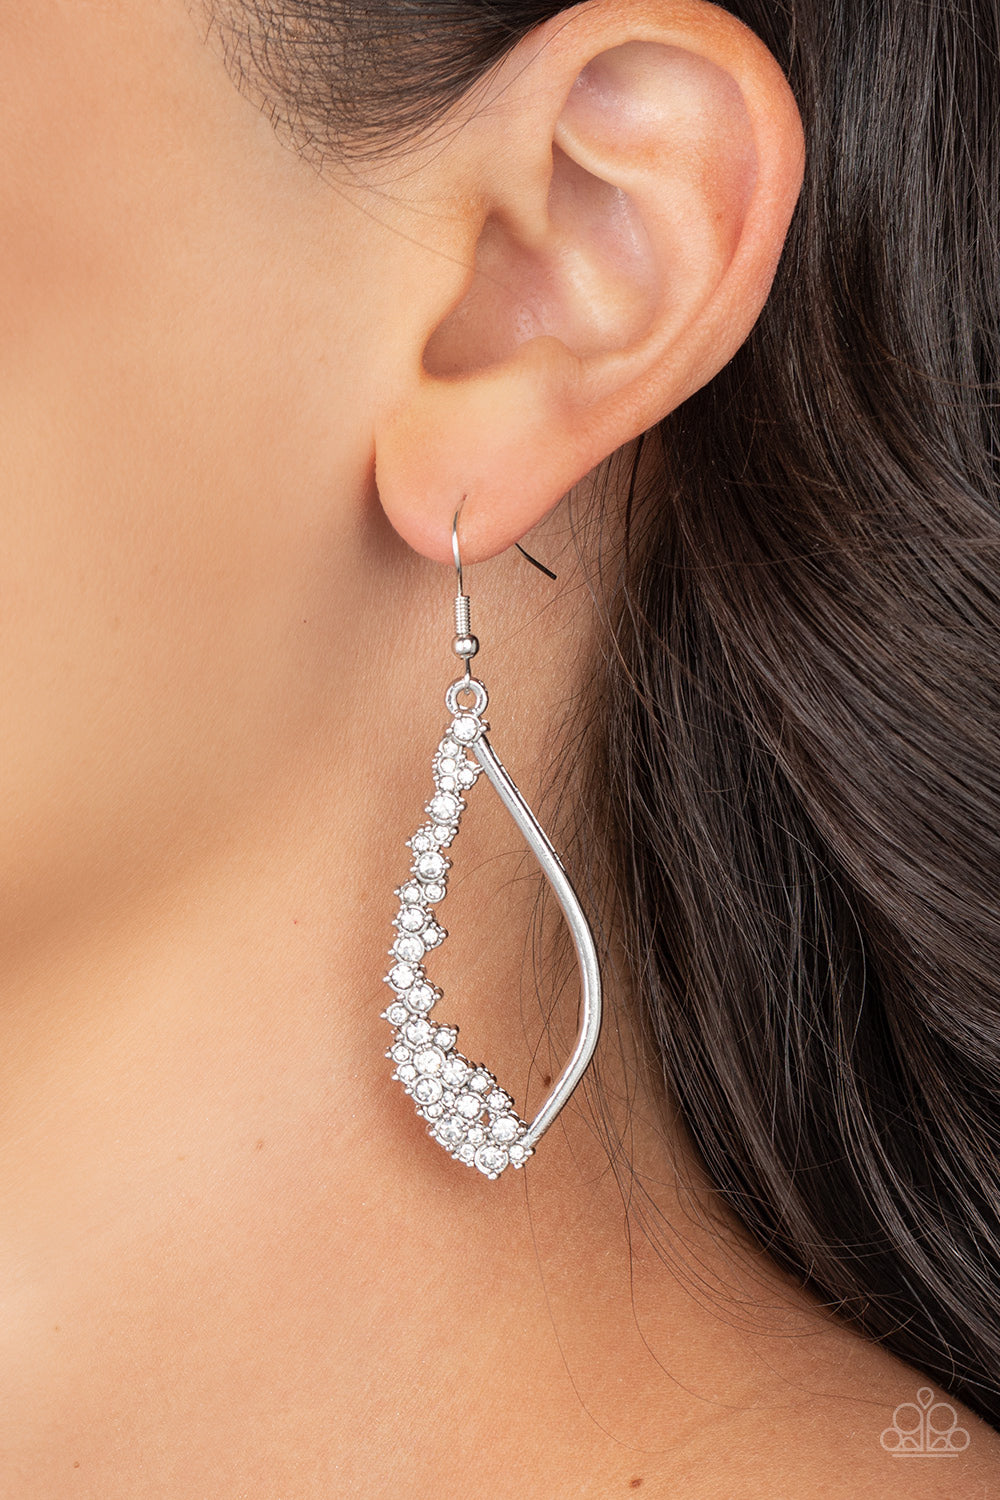 Sparkly Side Effects - White Earrings